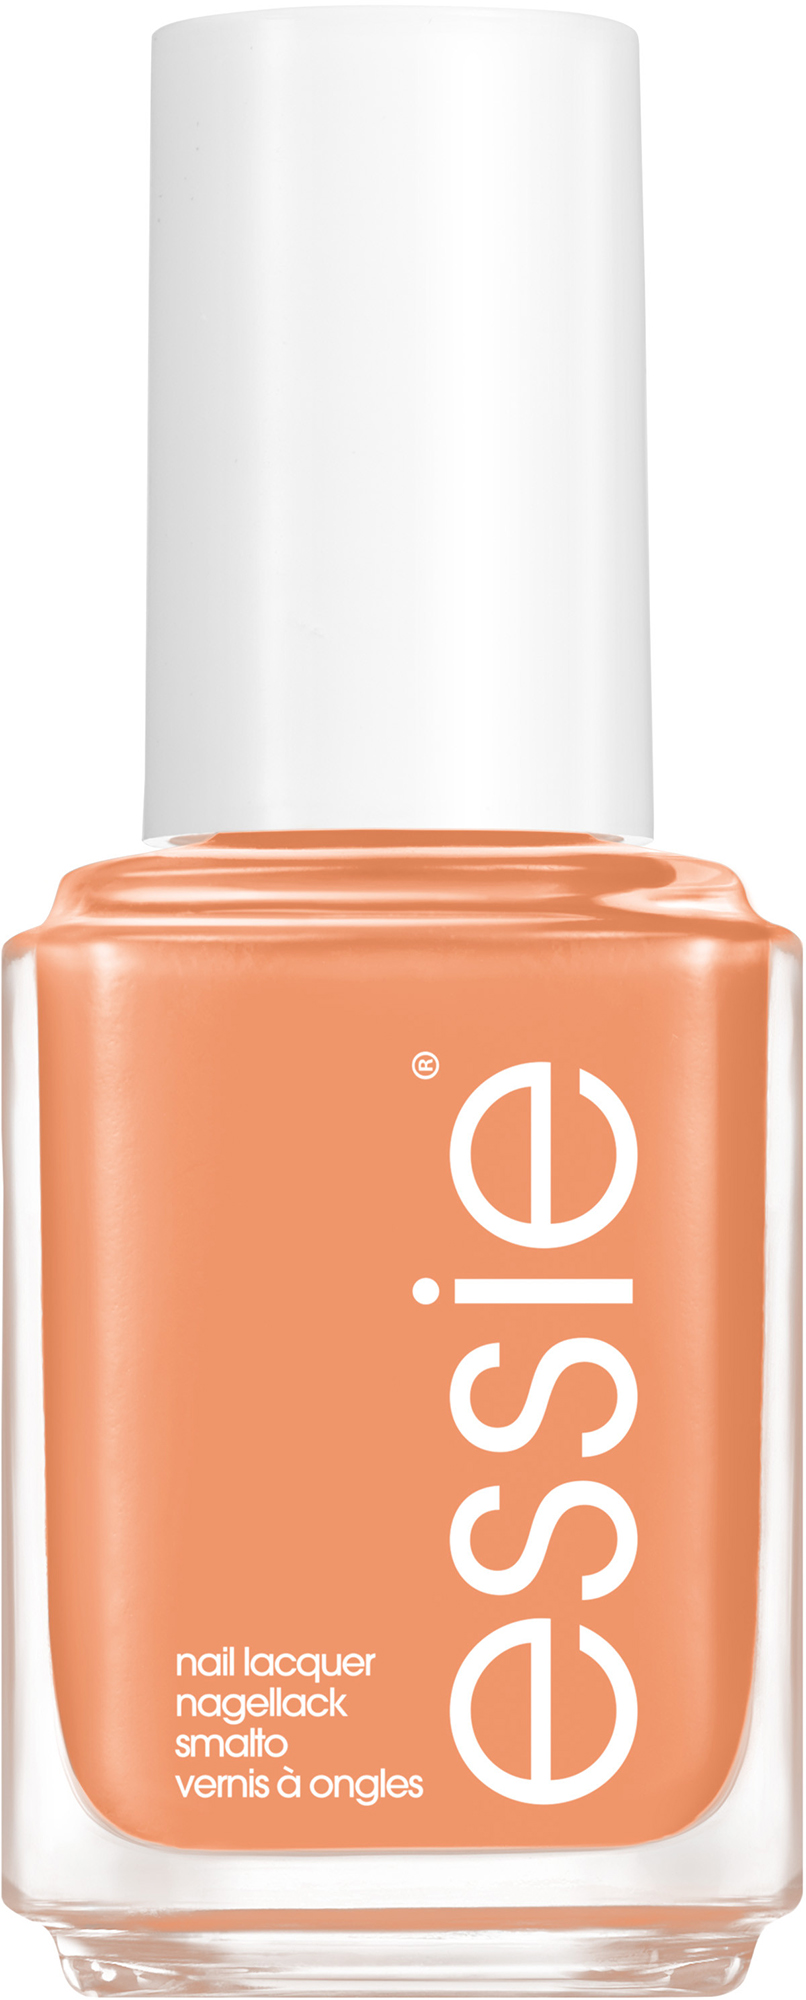 Coconuts Lacquer Essie Nail Summer For Collection 843 You